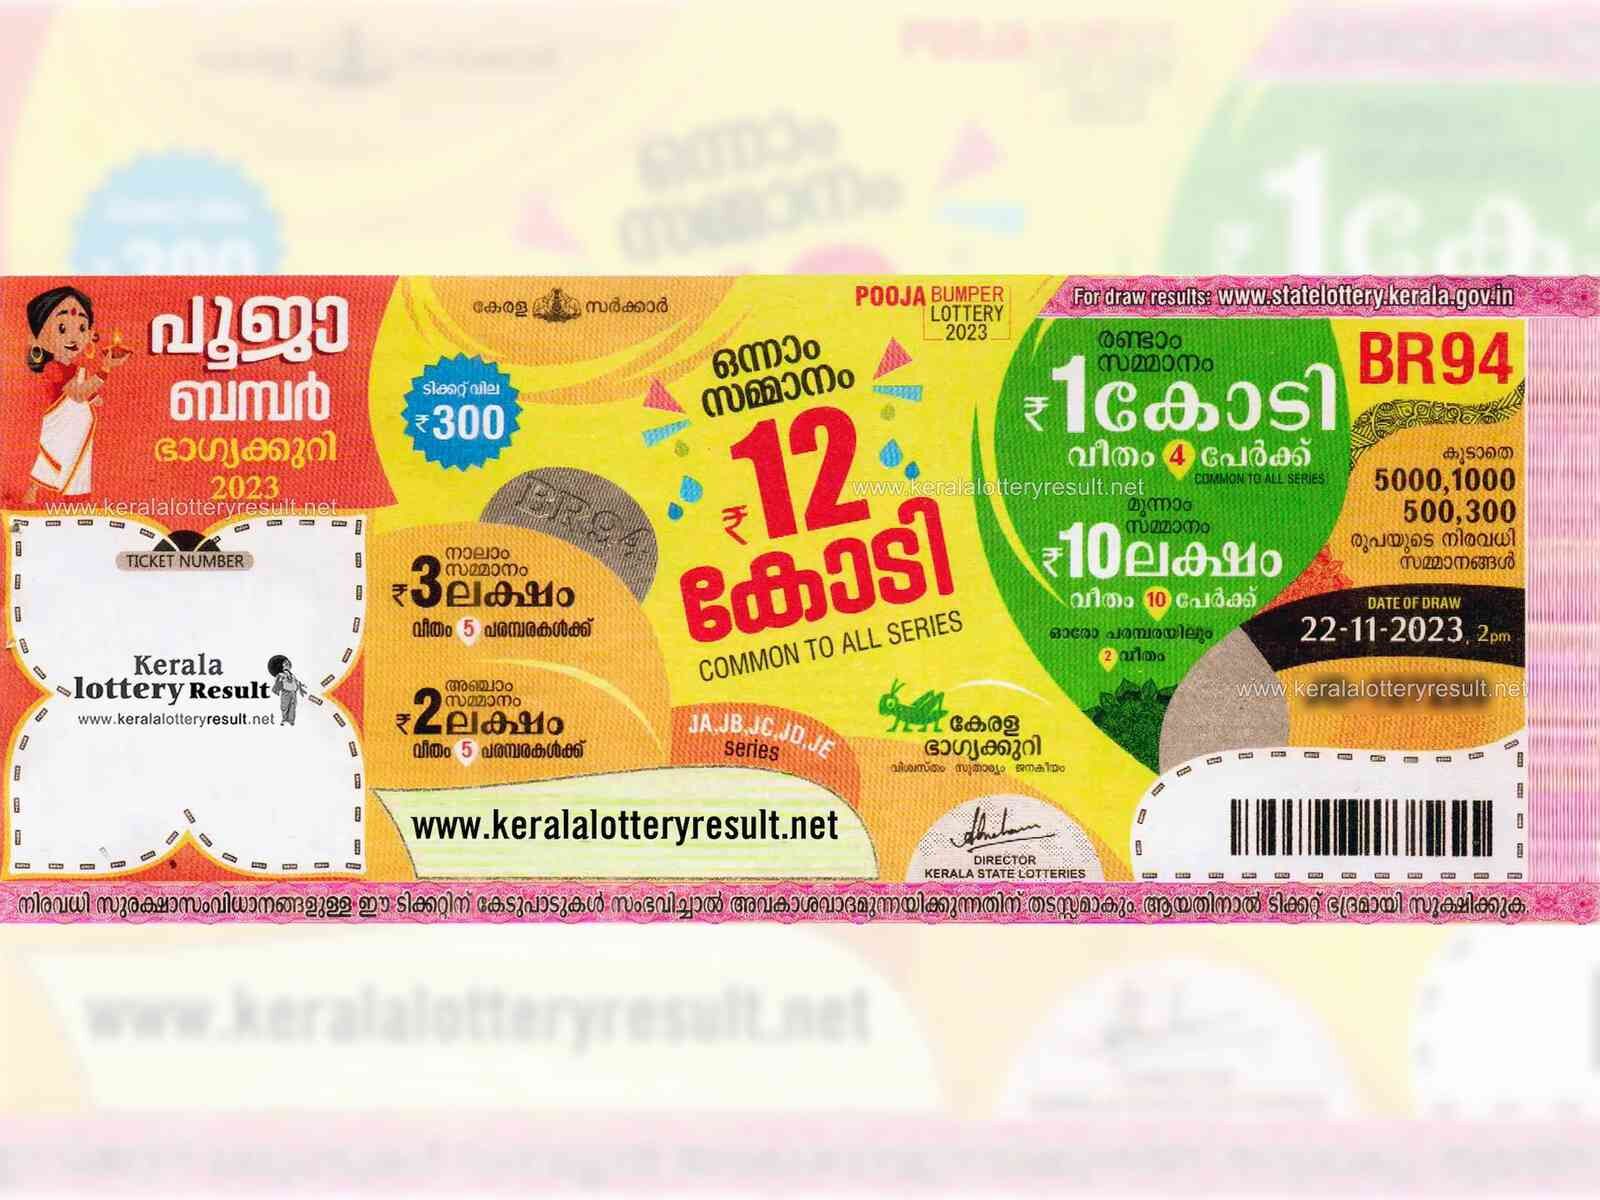 Kerala Lottery result today 22.11.2023 Pooja Bumper BR 94 lottery result -  India Today